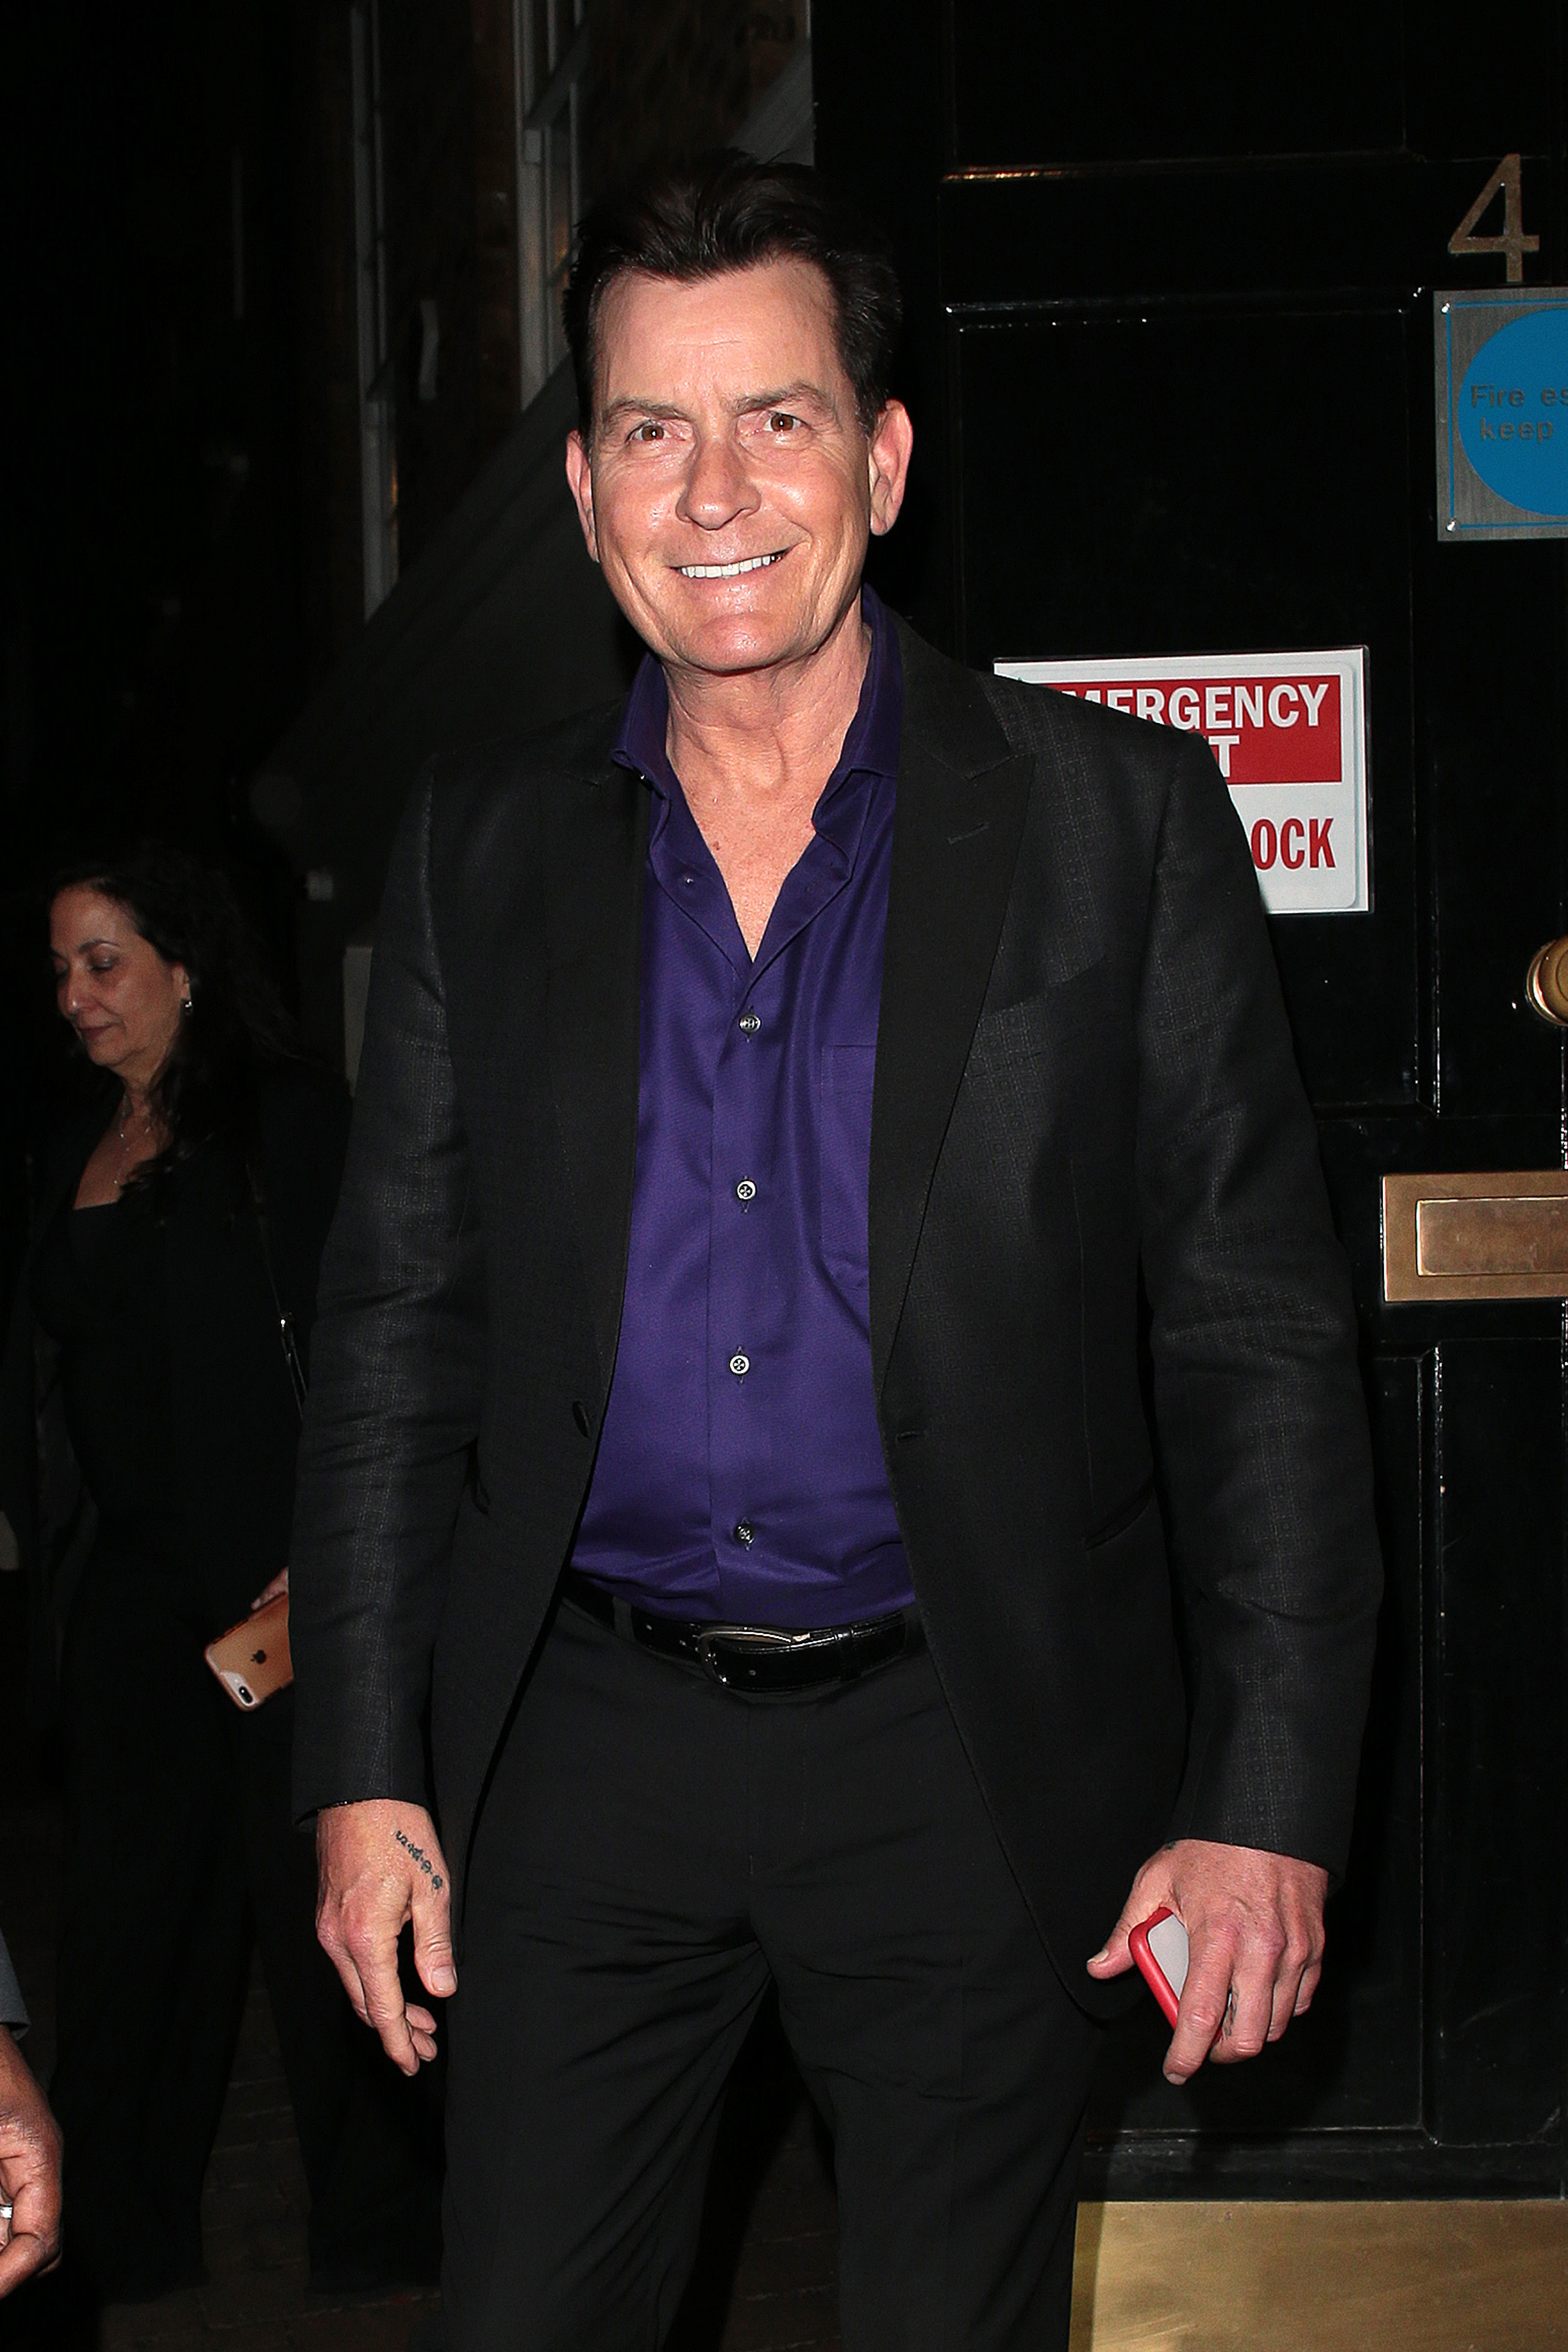 Charlie Sheen am 9. April 2019 in London, England | Quelle: Getty Images